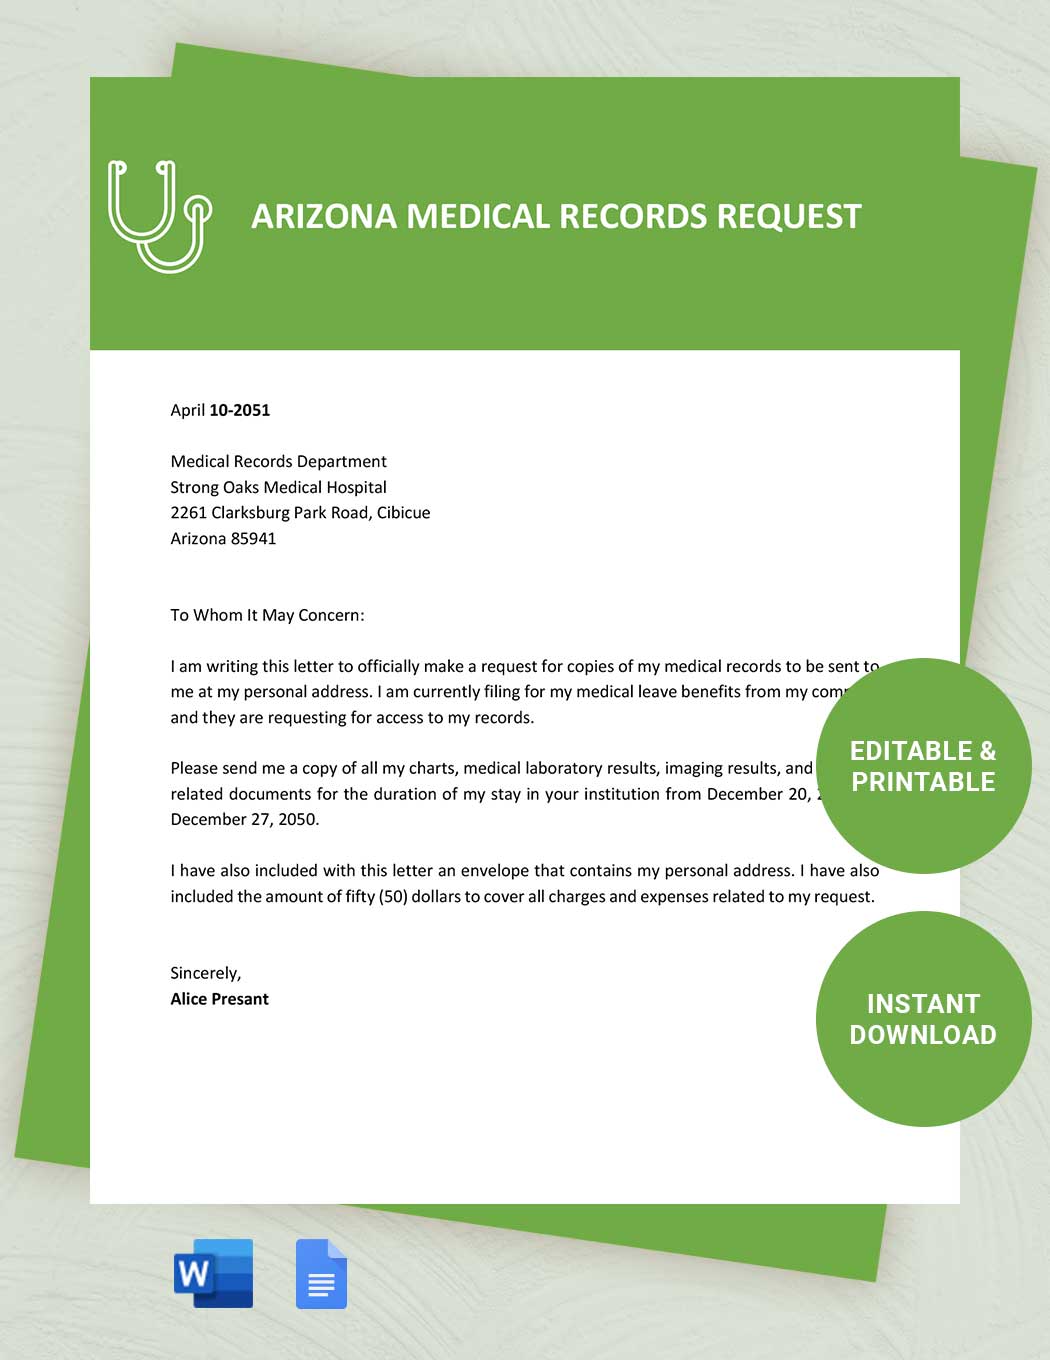 Arizona Medical Records Request Template in Word, Google Docs